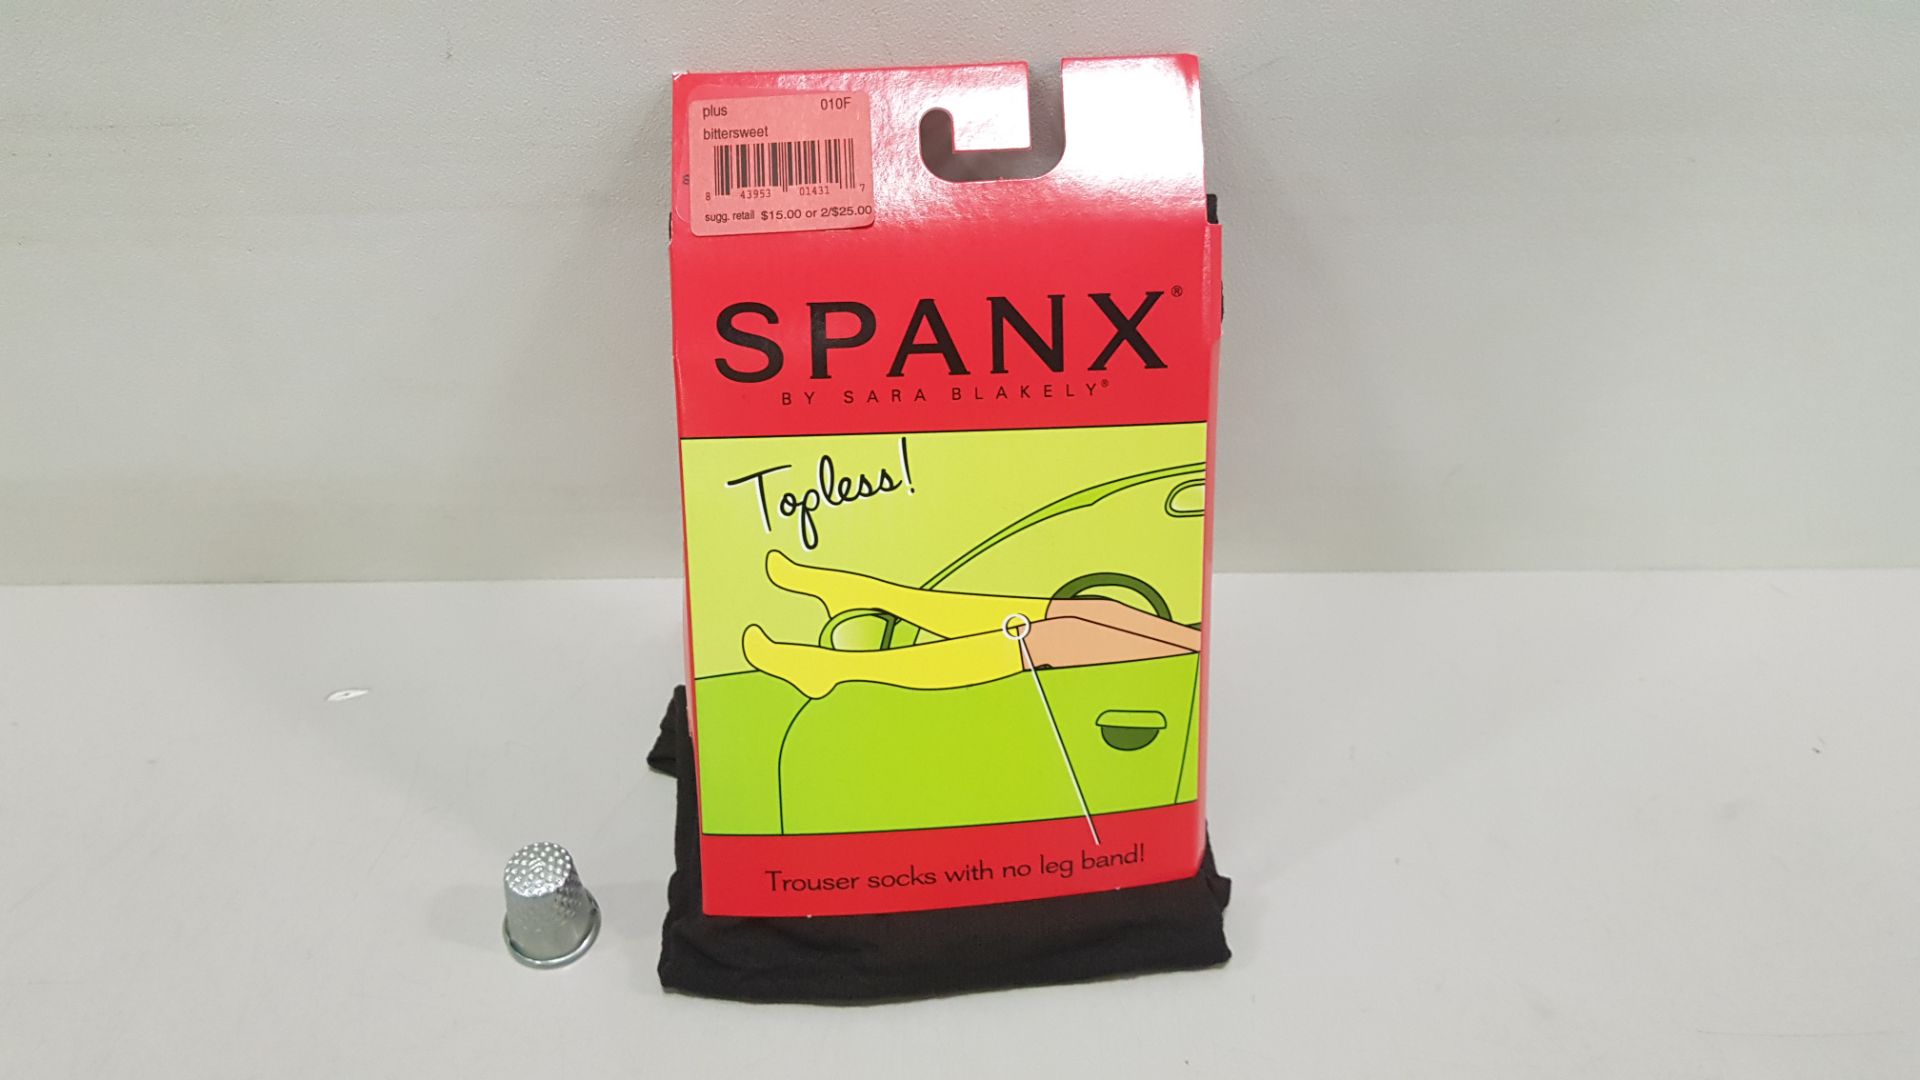 60 X BRAND NEW SPANX BITTERSWEET TOPLESS TROUSER SOCKS WITH NO LEG BAND IN ONE SIZE RRP-$15.00PPC